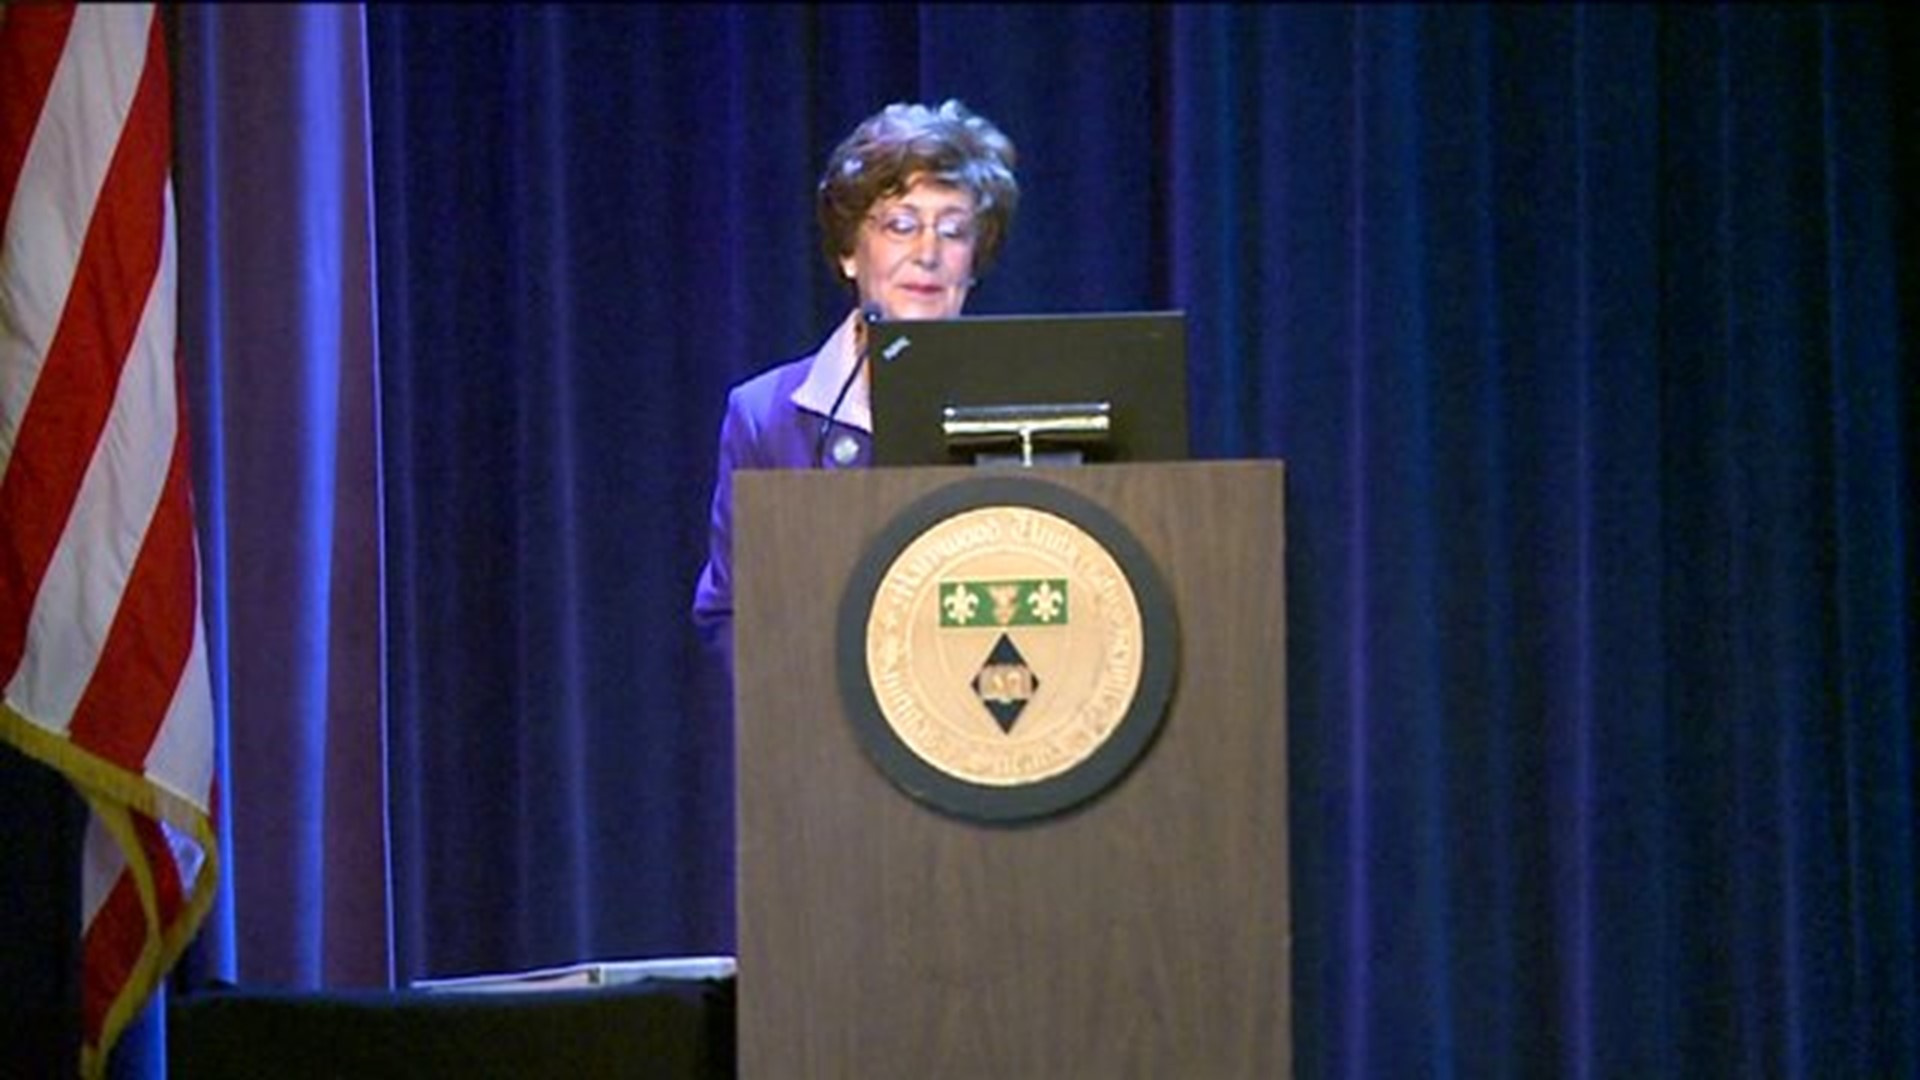 Students Hear From Holocaust Survivors